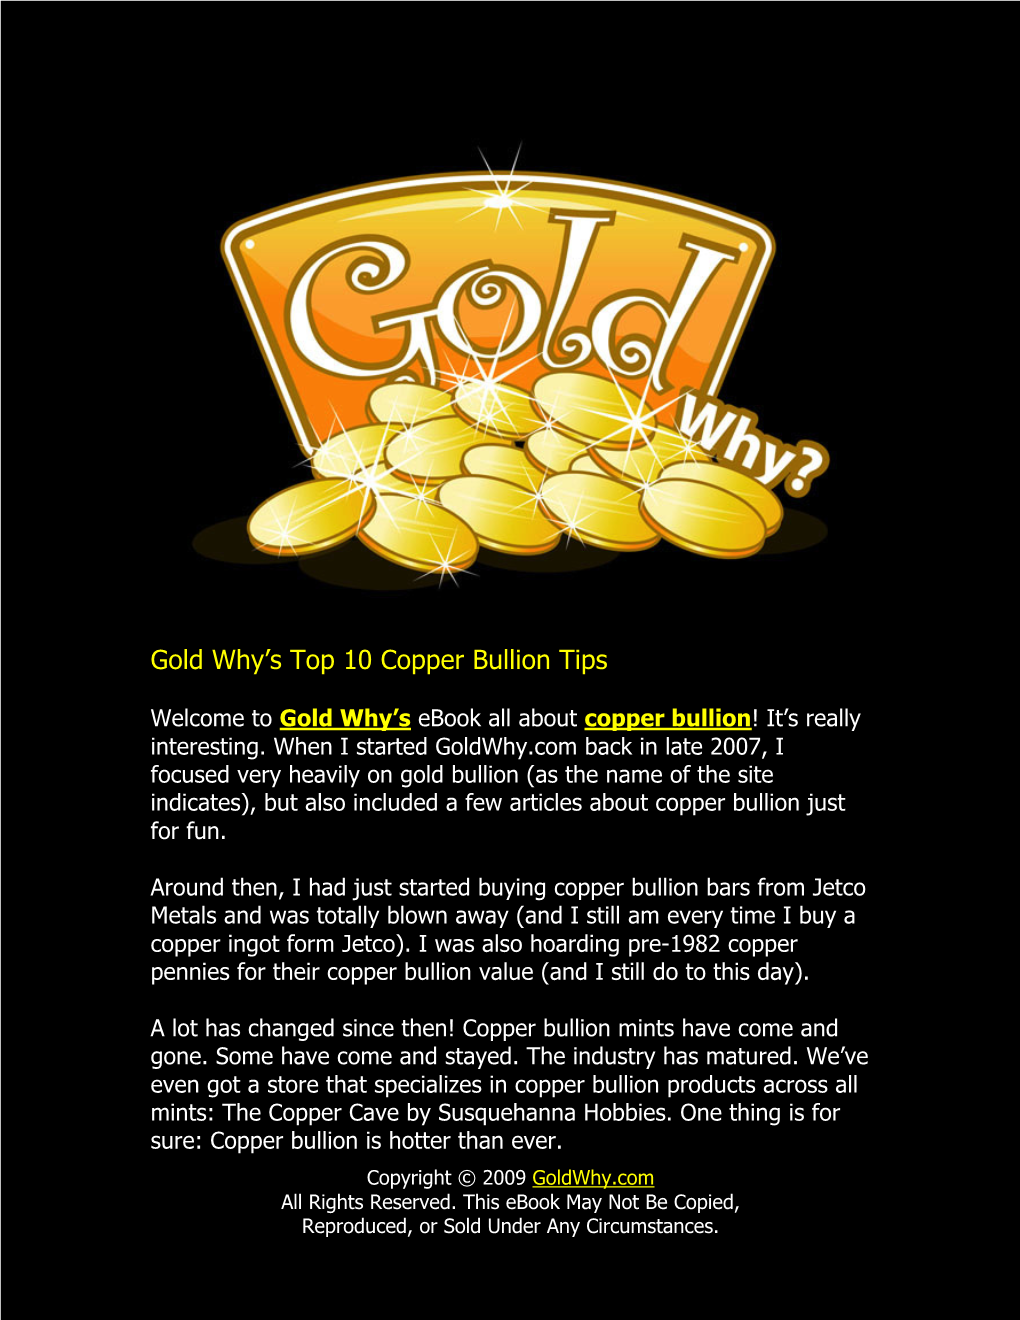 Gold Why's Top 10 Copper Bullion Tips